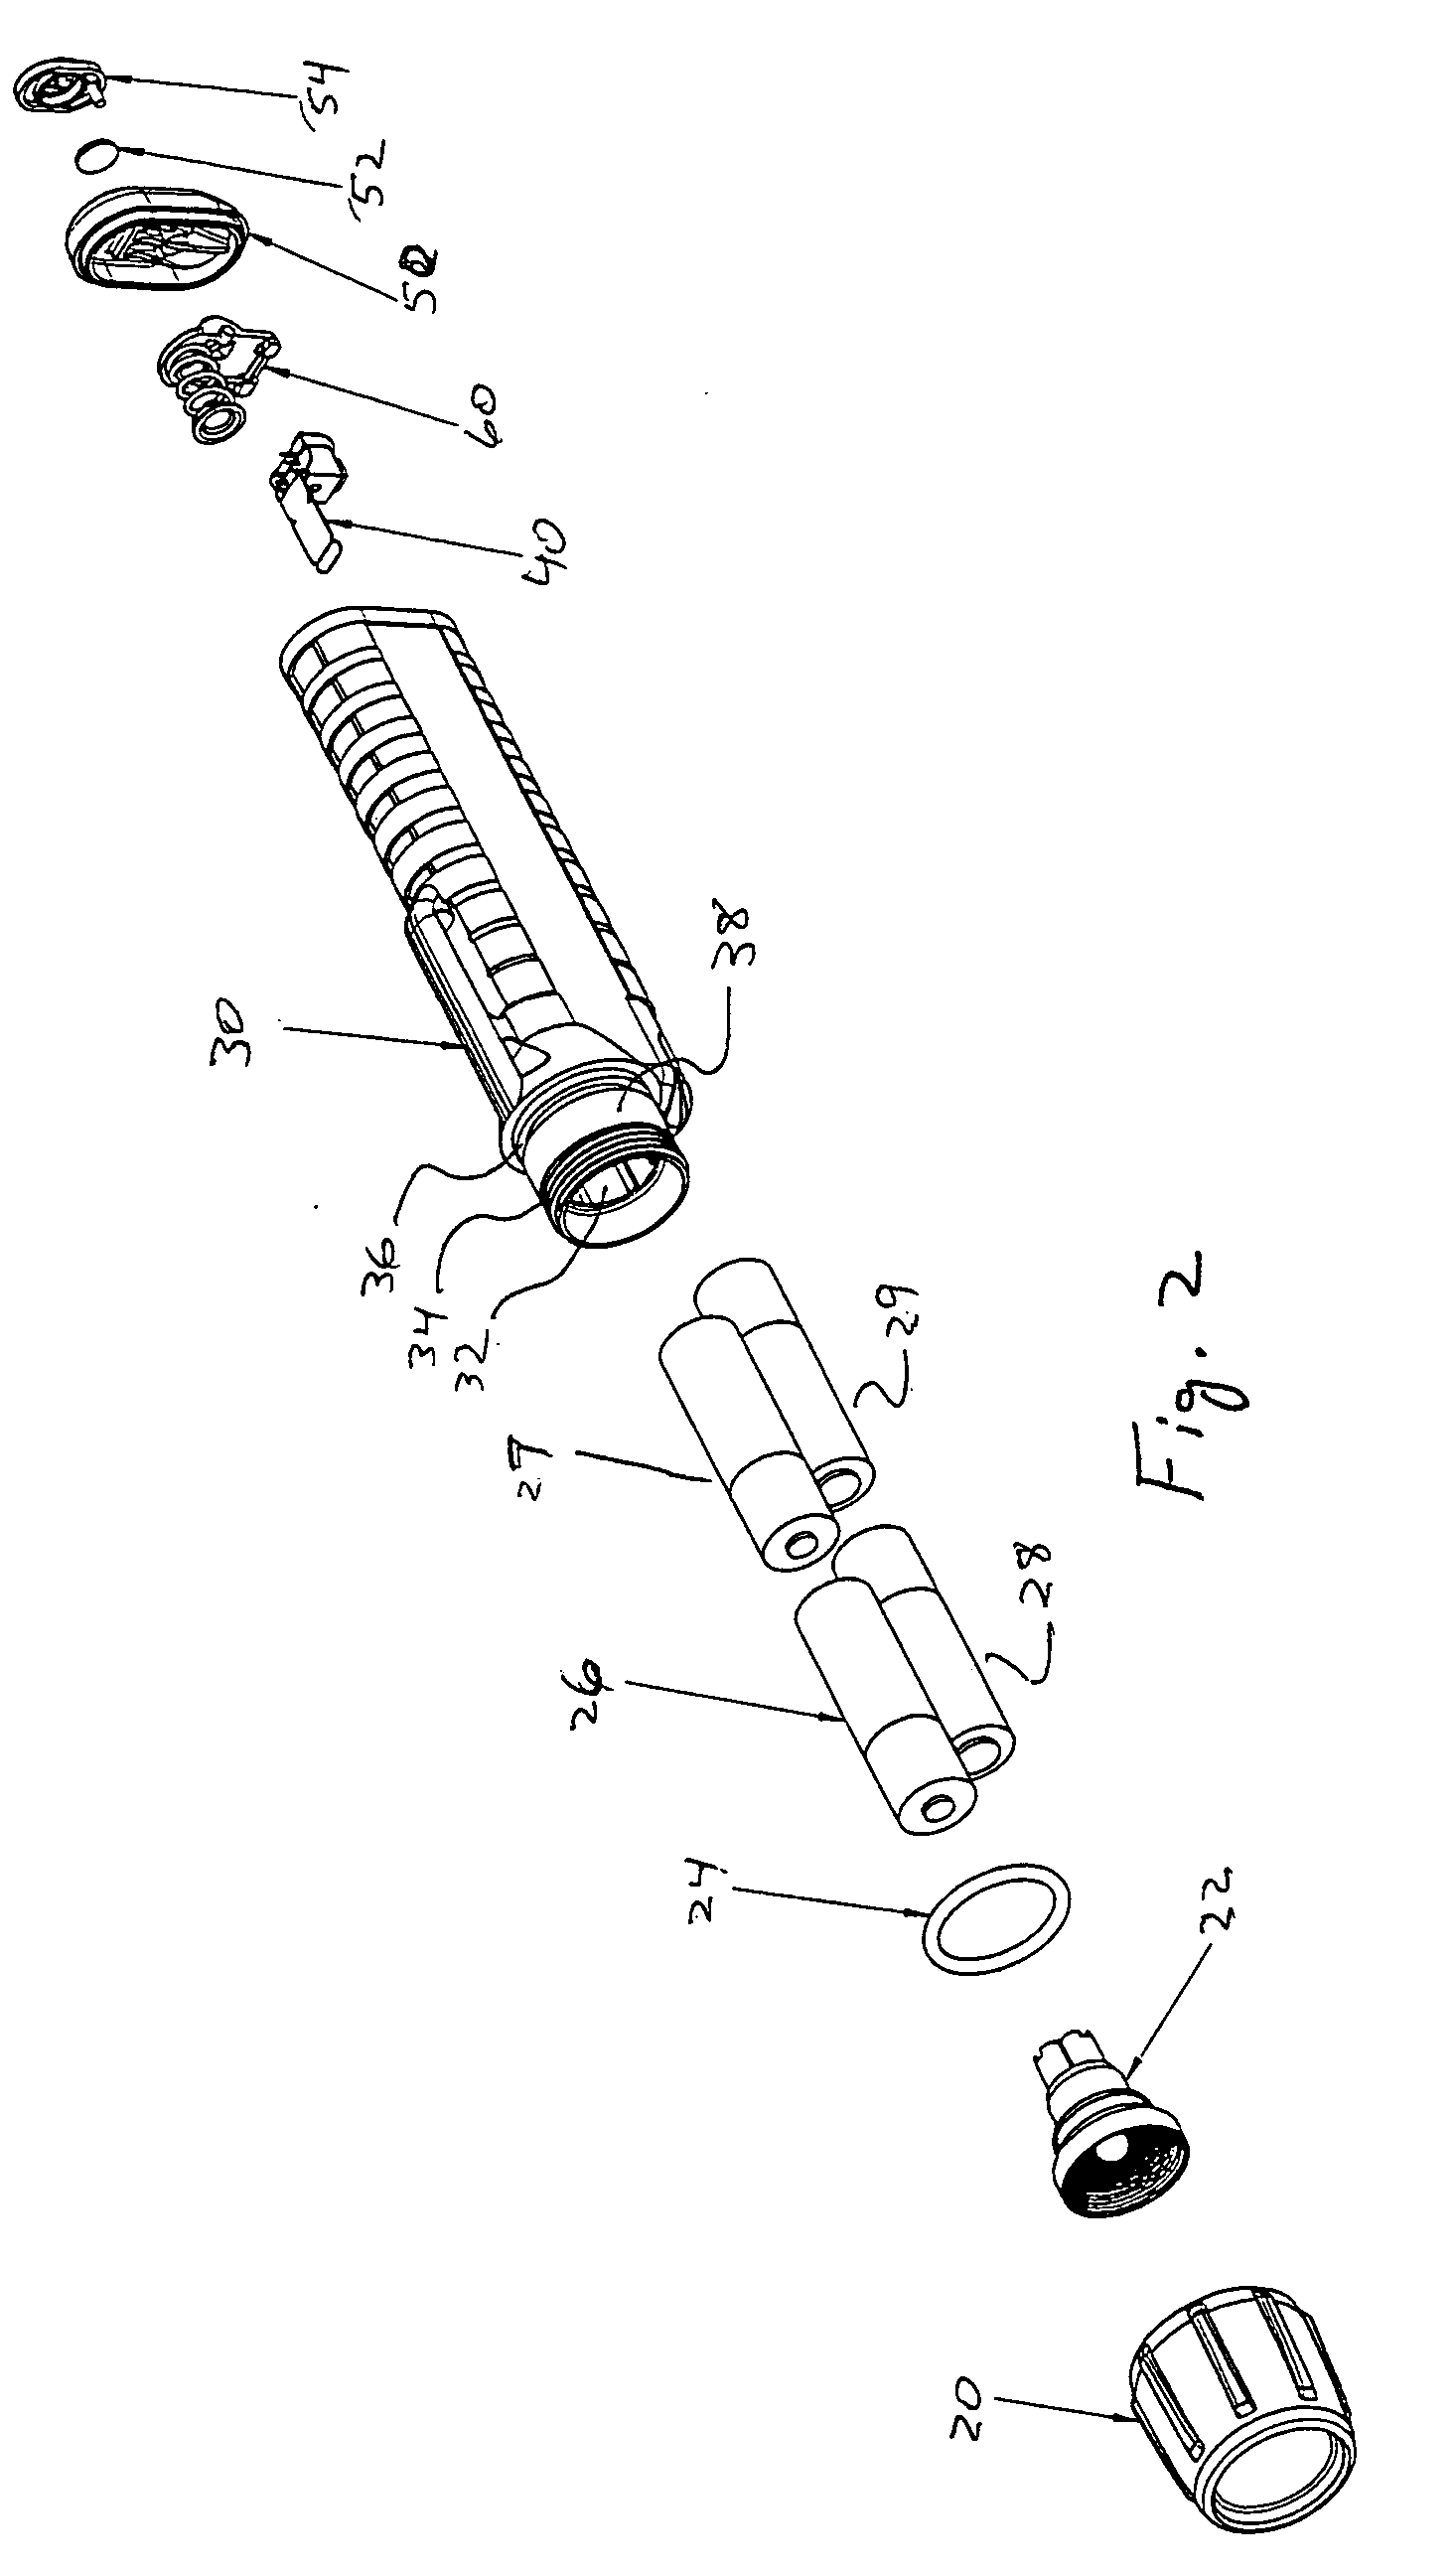 Flashlight with drop-in side-by-side batteries